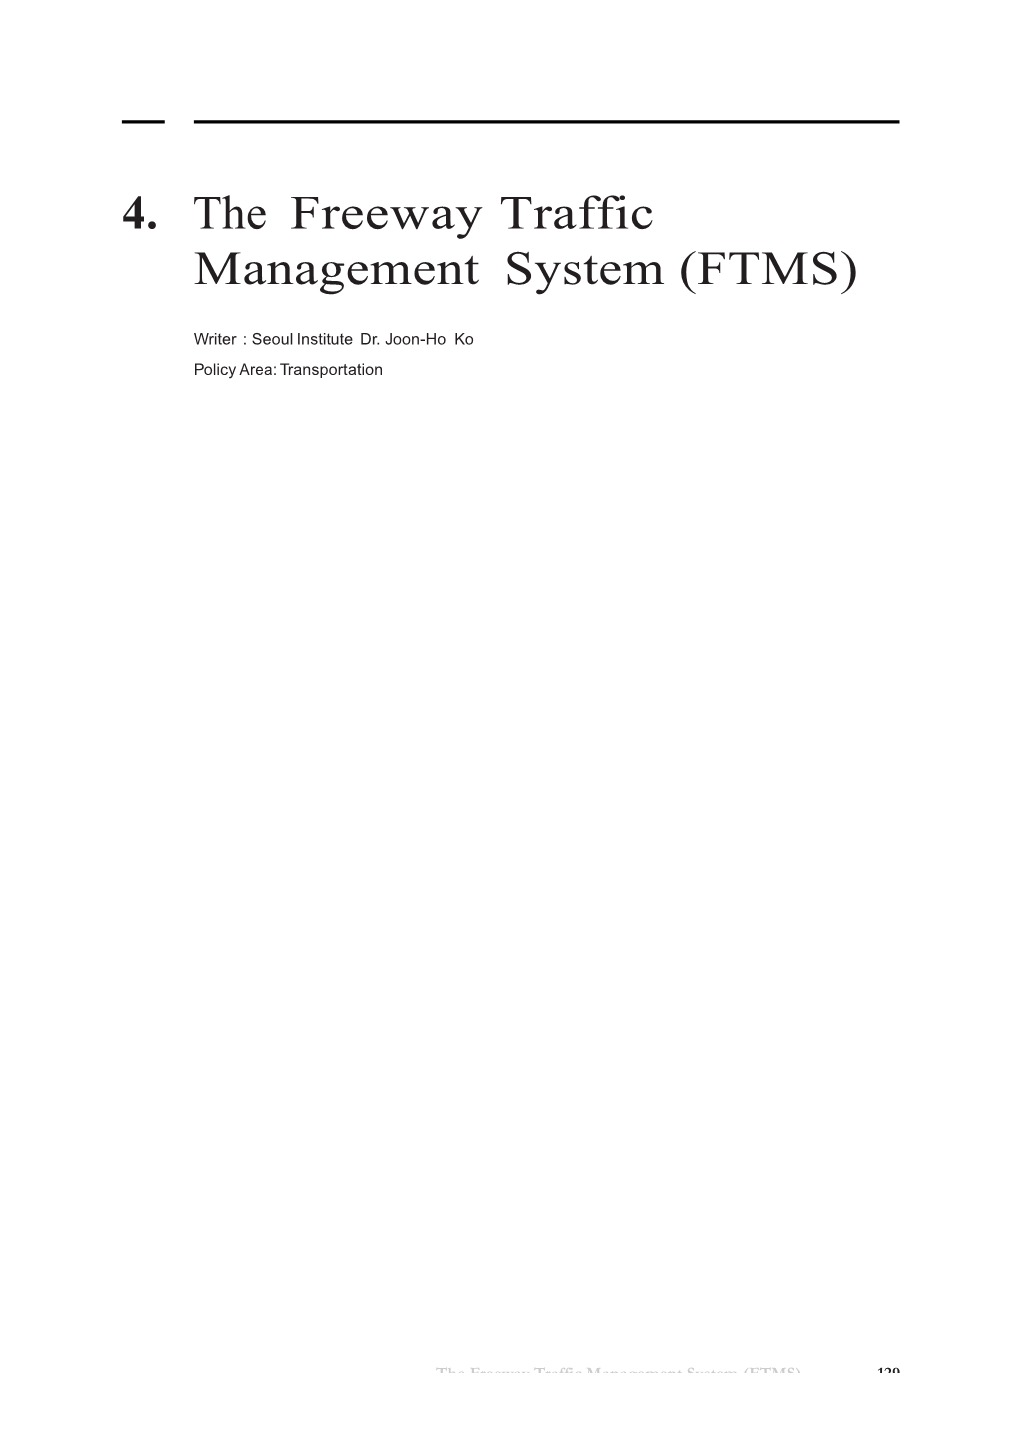 4. the Freeway Traffic Management System (FTMS)